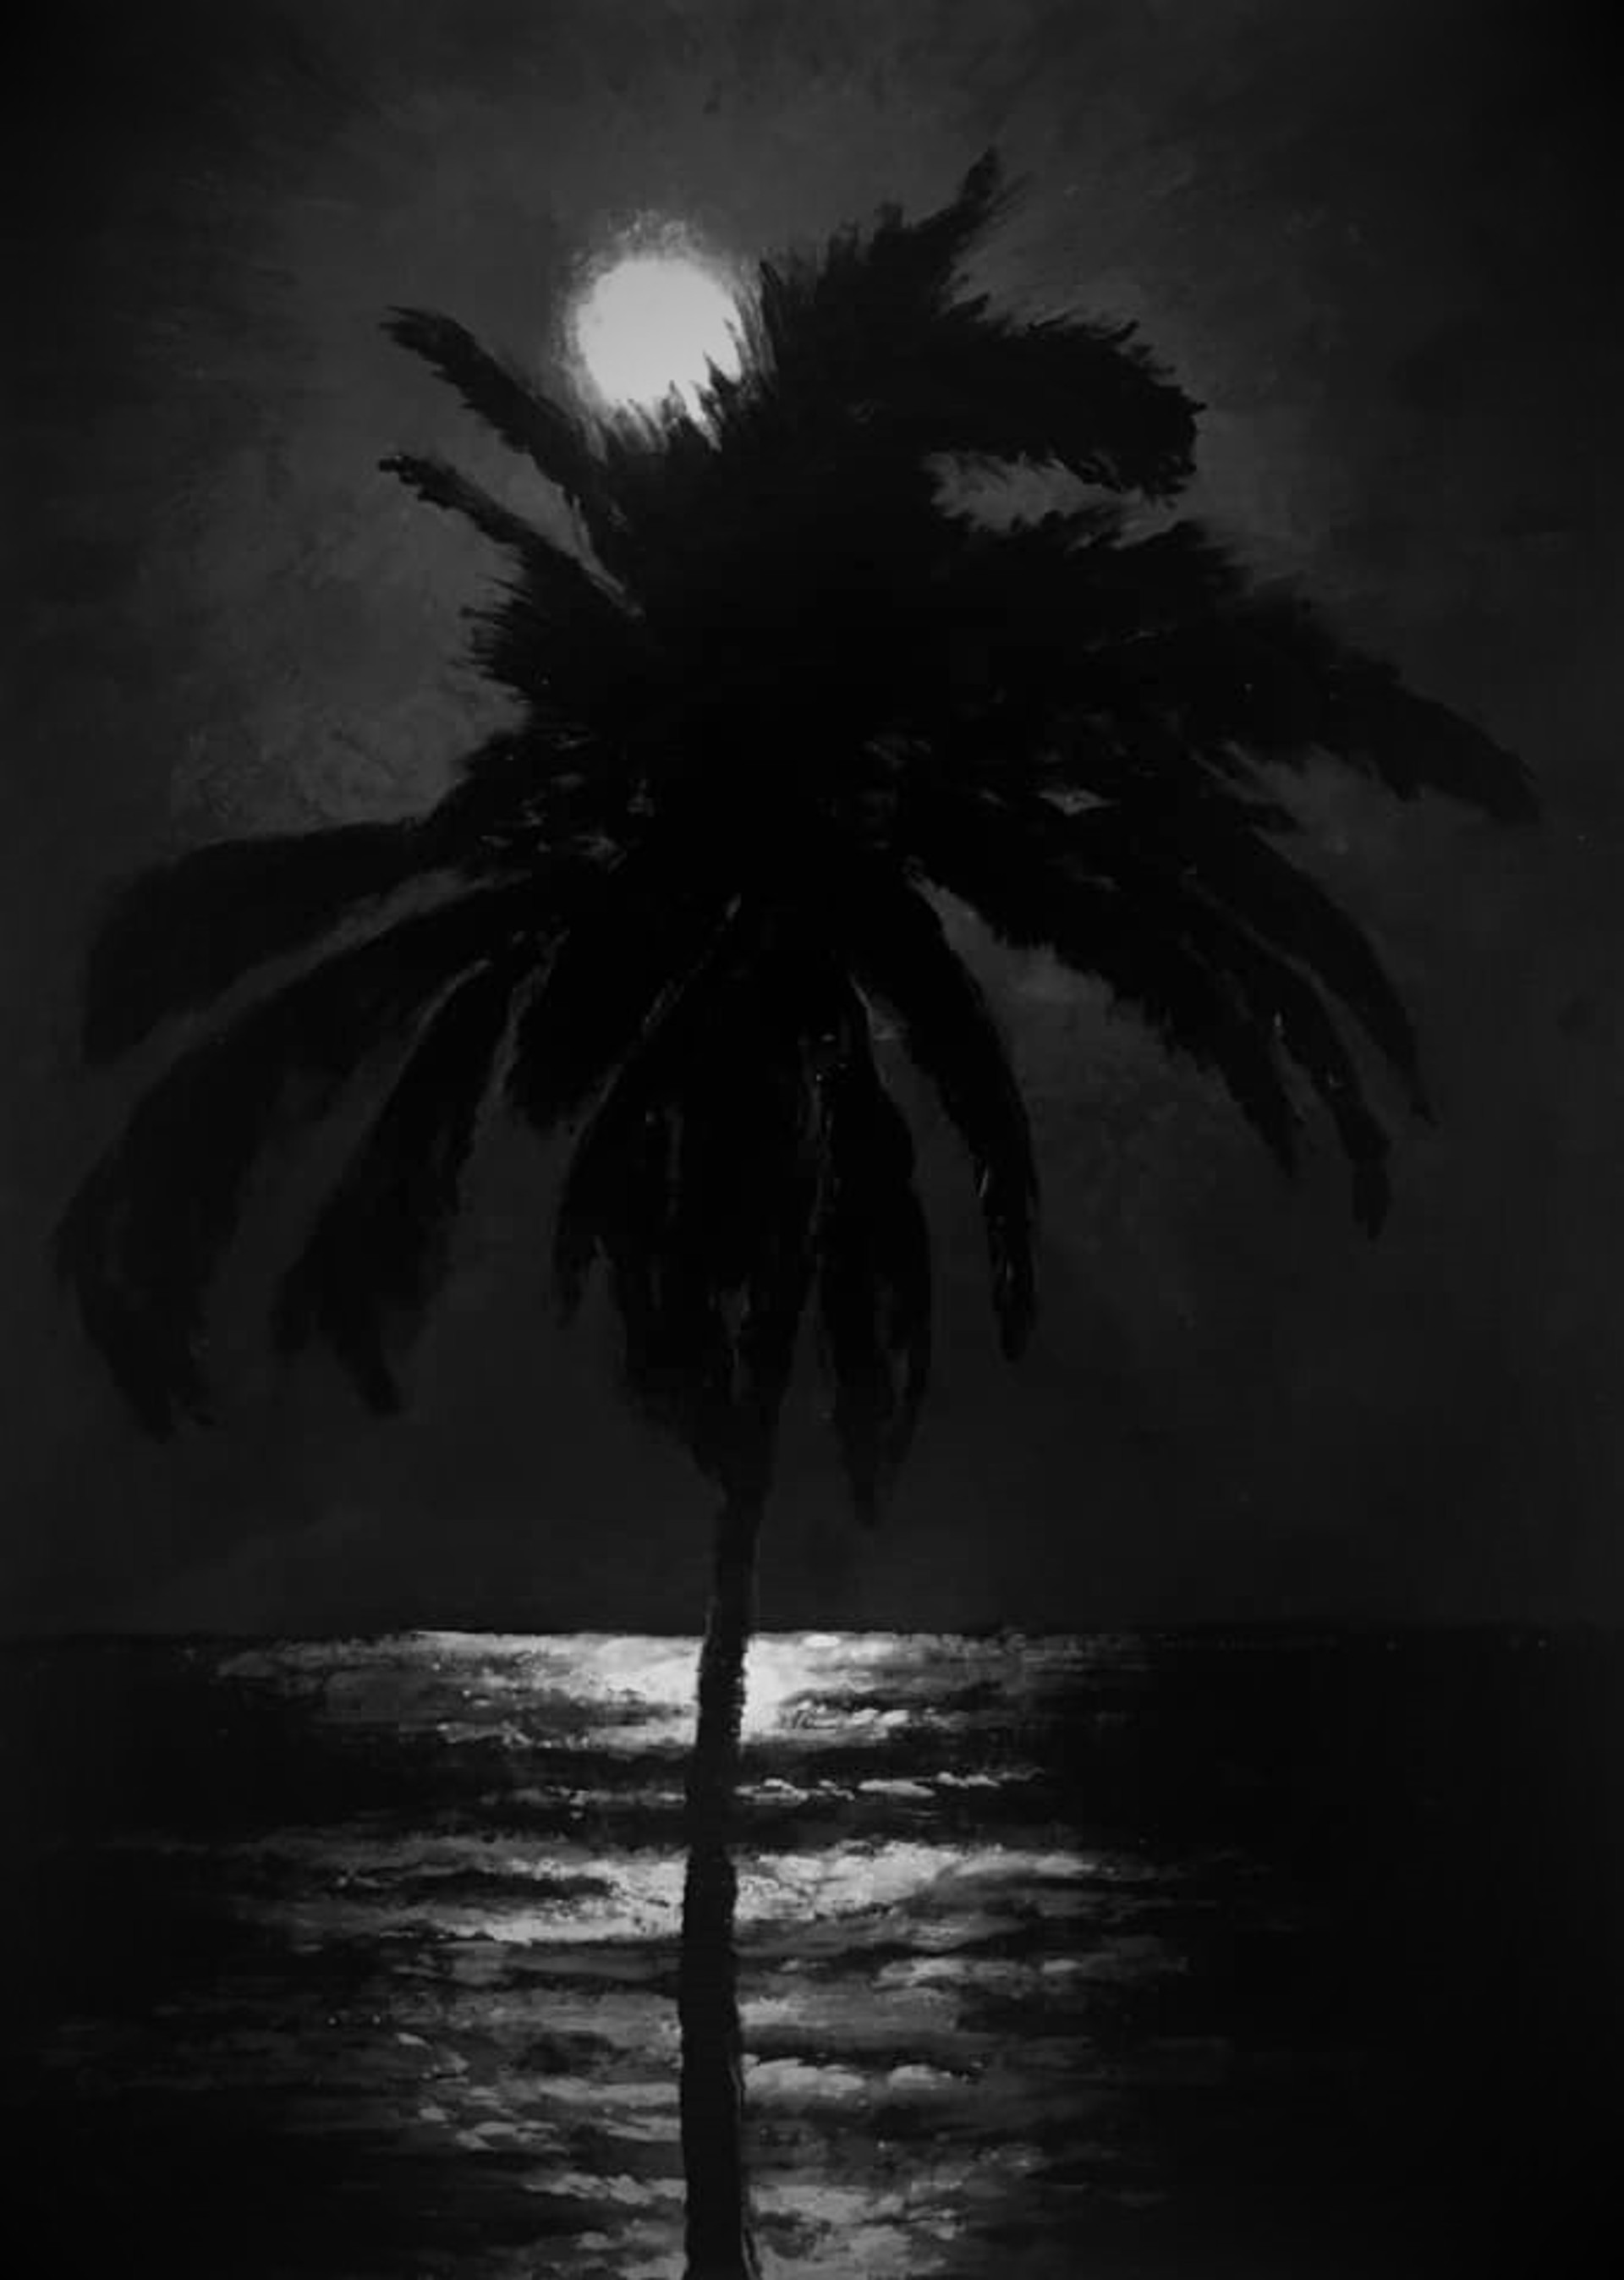 Moonlight Reflection and Palm Tree by Bob Fesser